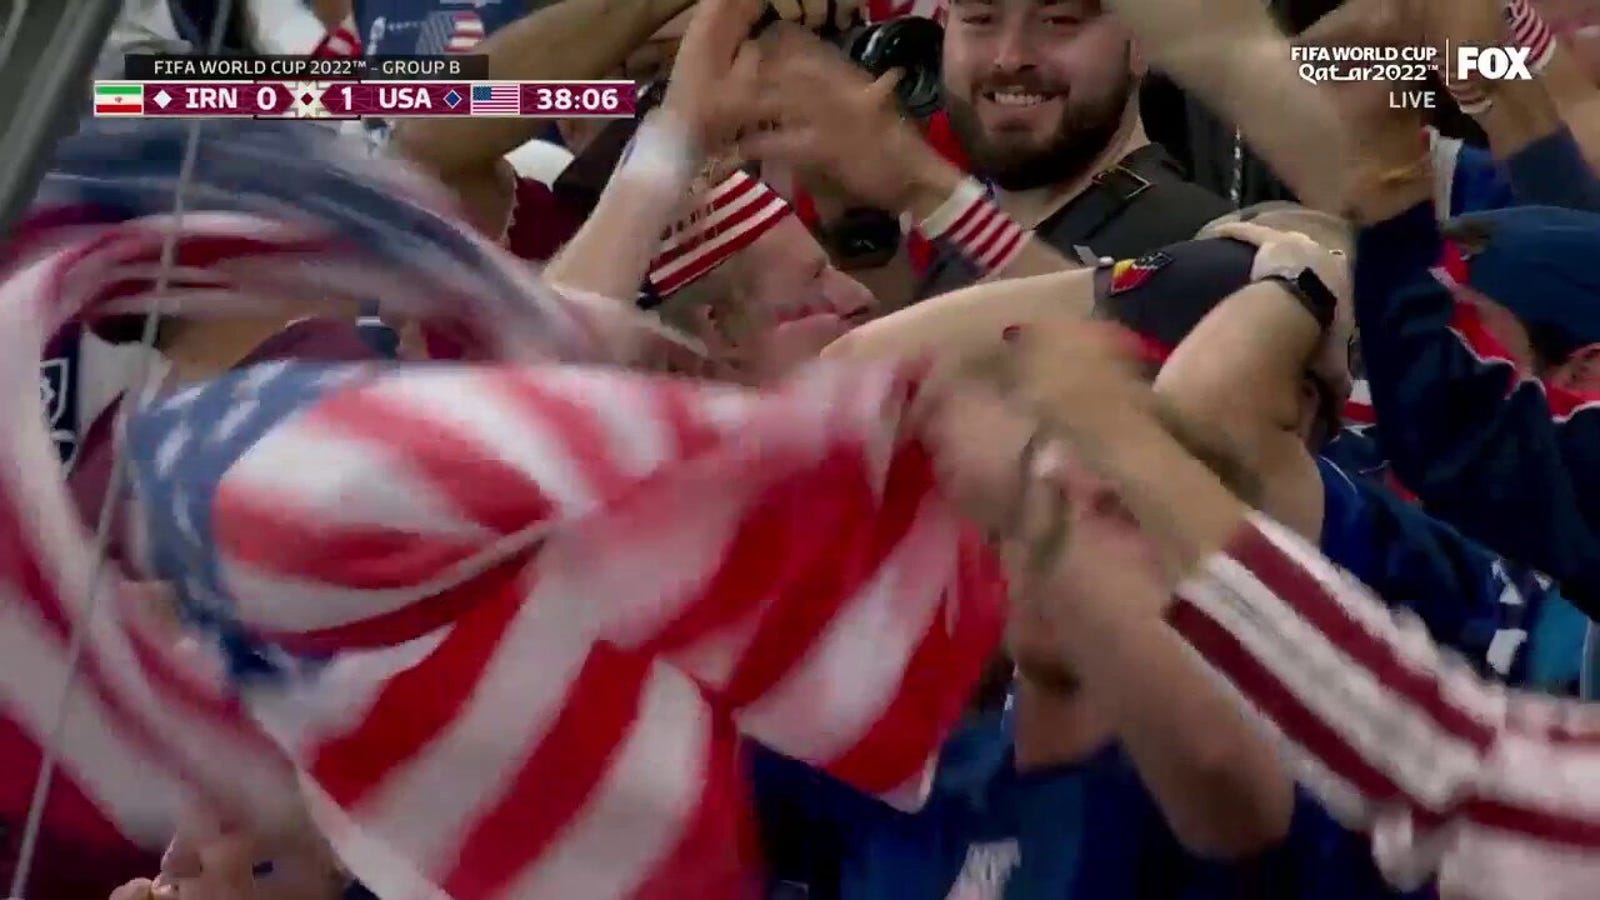 Christian Pulisic for the United States scores in the 38th minute against Iran | 2022 FIFA World Cup